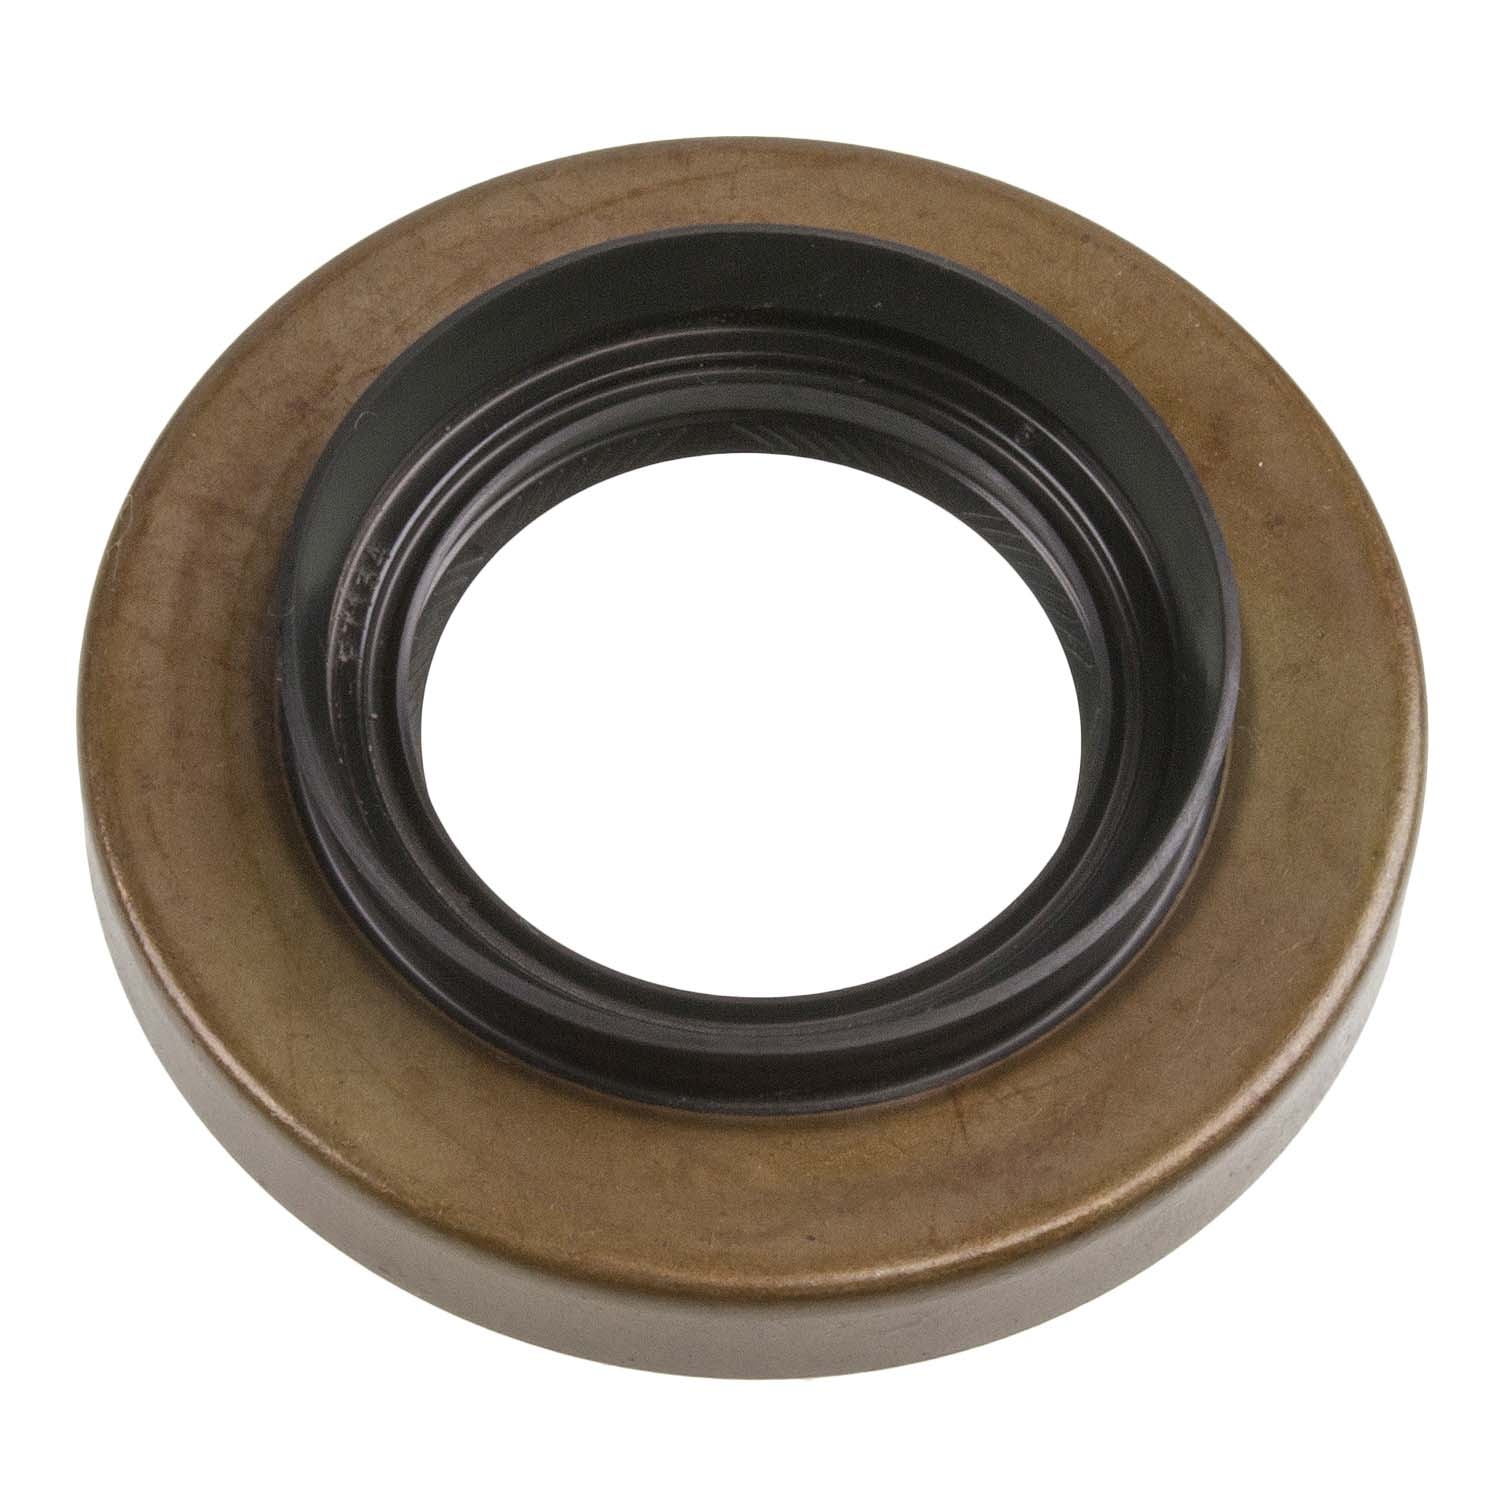 Motive Gear Differential Pinion Seal, Differential Pinion Seal, Front, Pn 1177, BHHD-1177